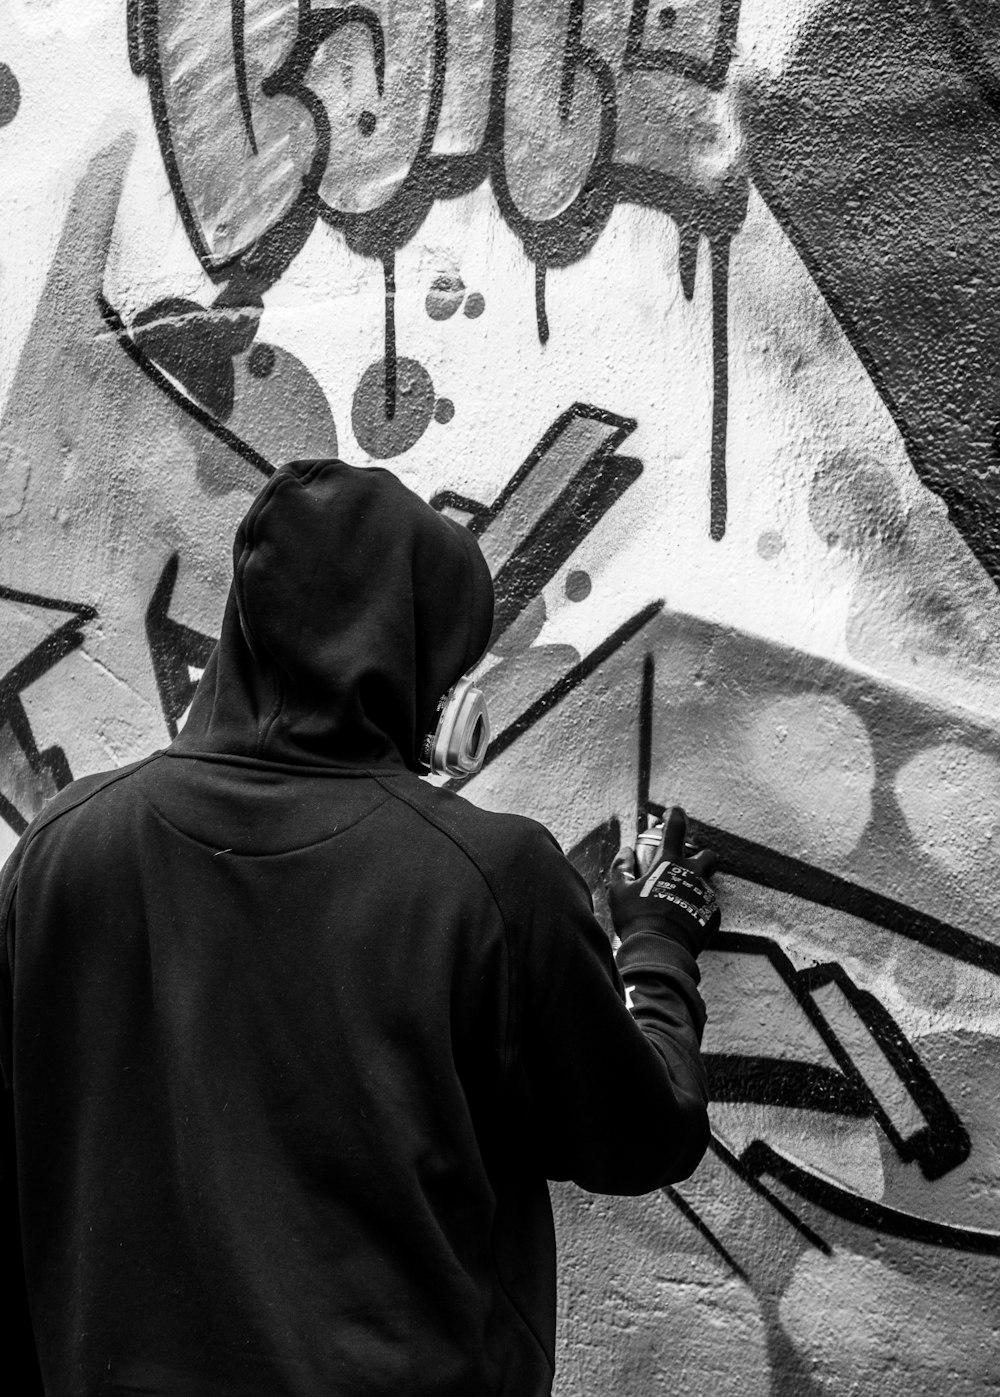 grayscale photography of person painting on wall